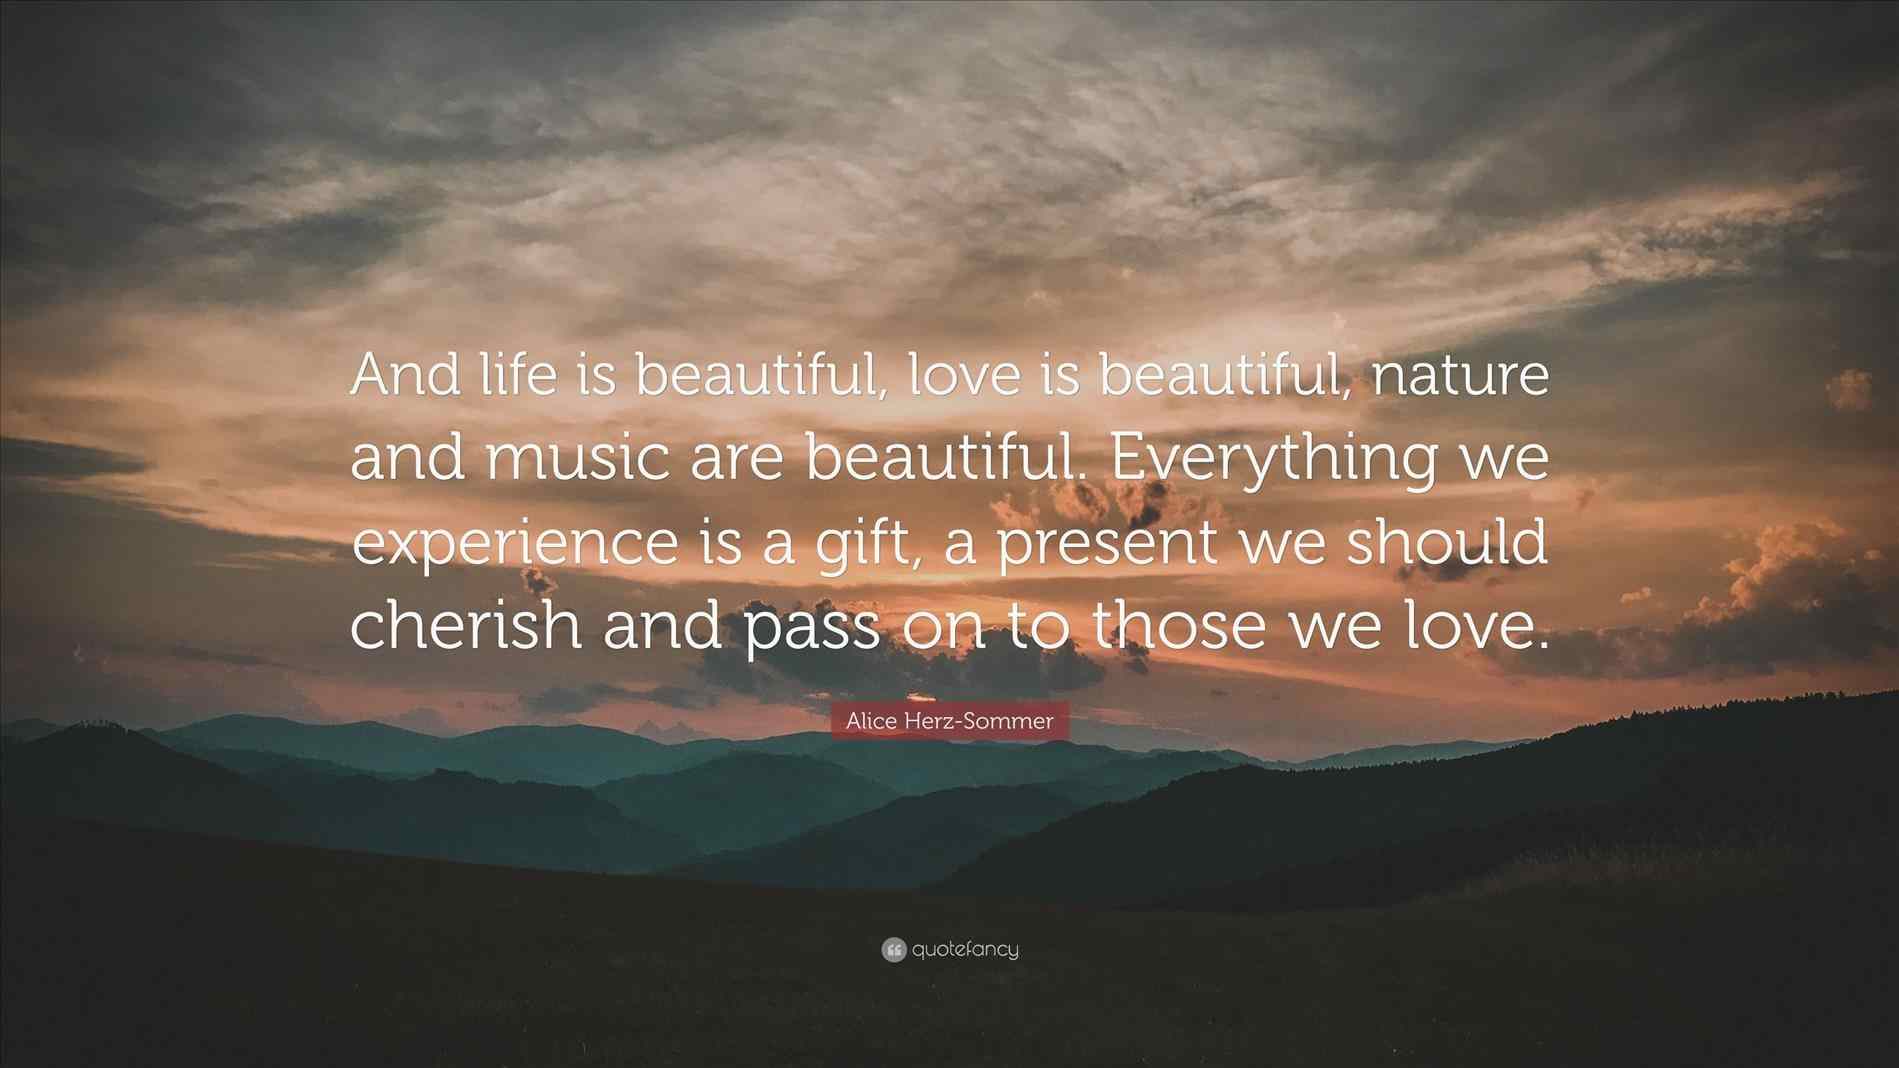 Beautiful people inspirational friday nature wallpaper quotefancy